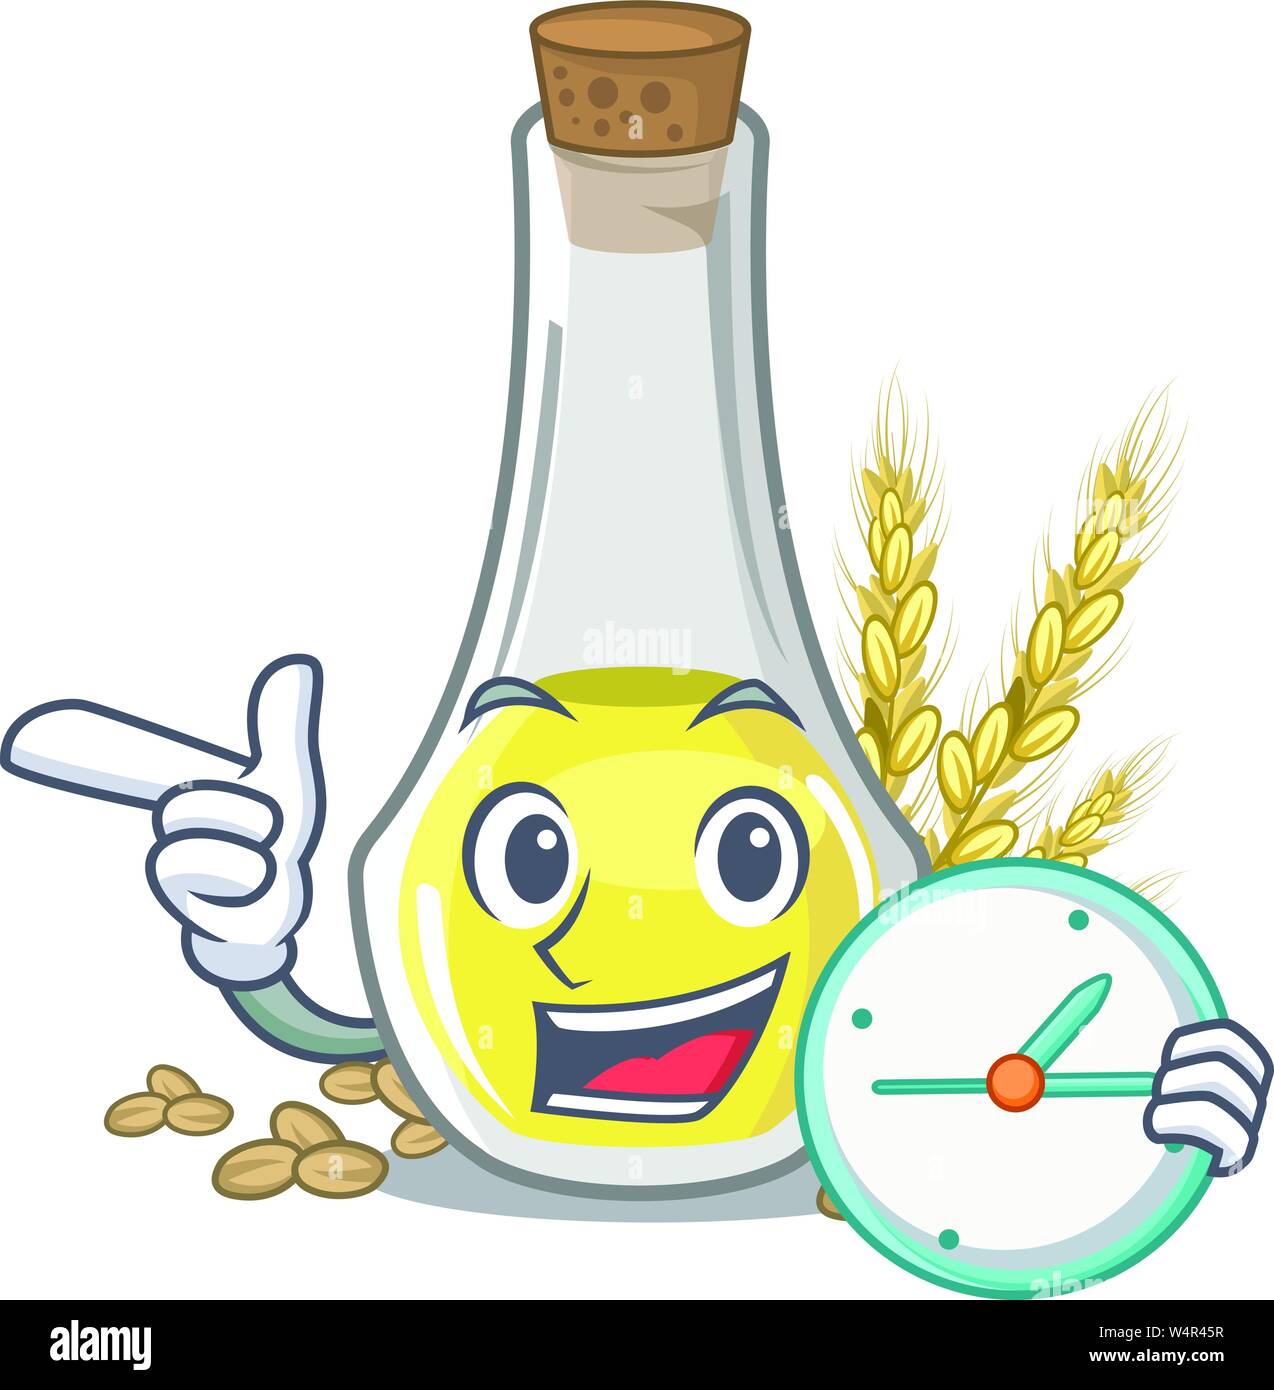 With clock wheat germ oil the mascot shape vector illustration Stock Vector